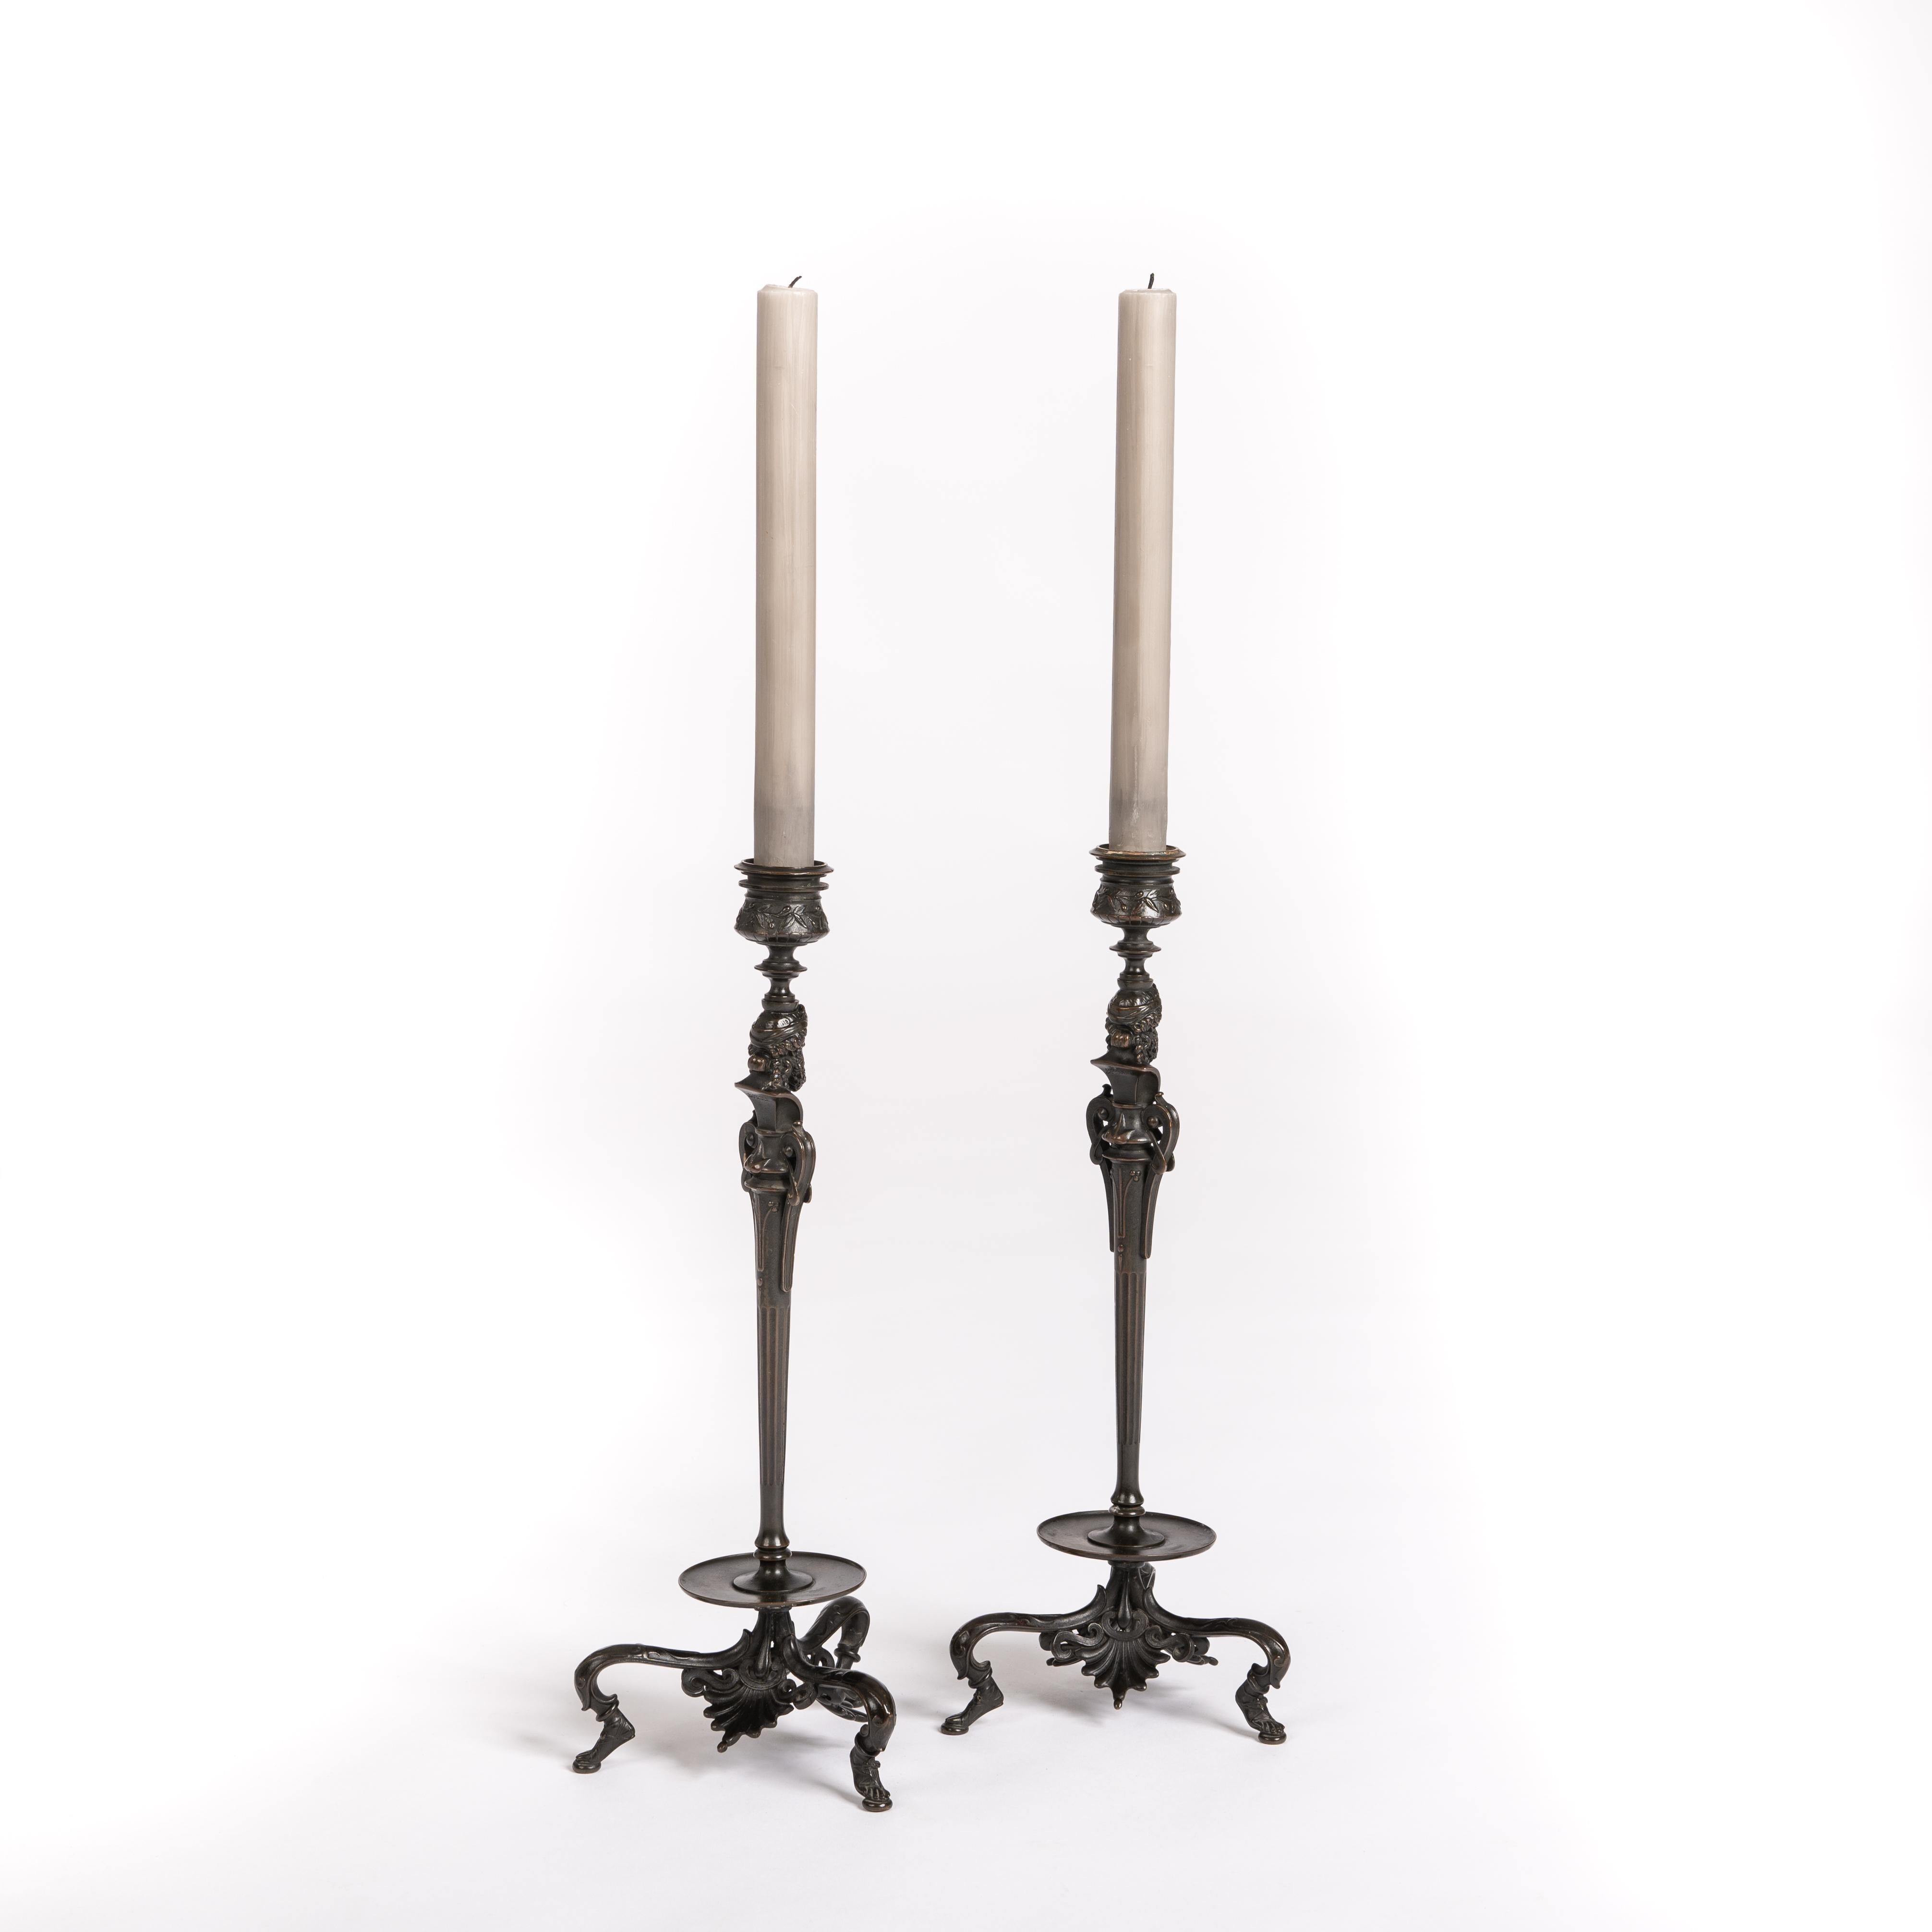 Cast Pair of French Napoleon III Bronze Candlesticks by Foundry F. Barbedienne 1860s For Sale